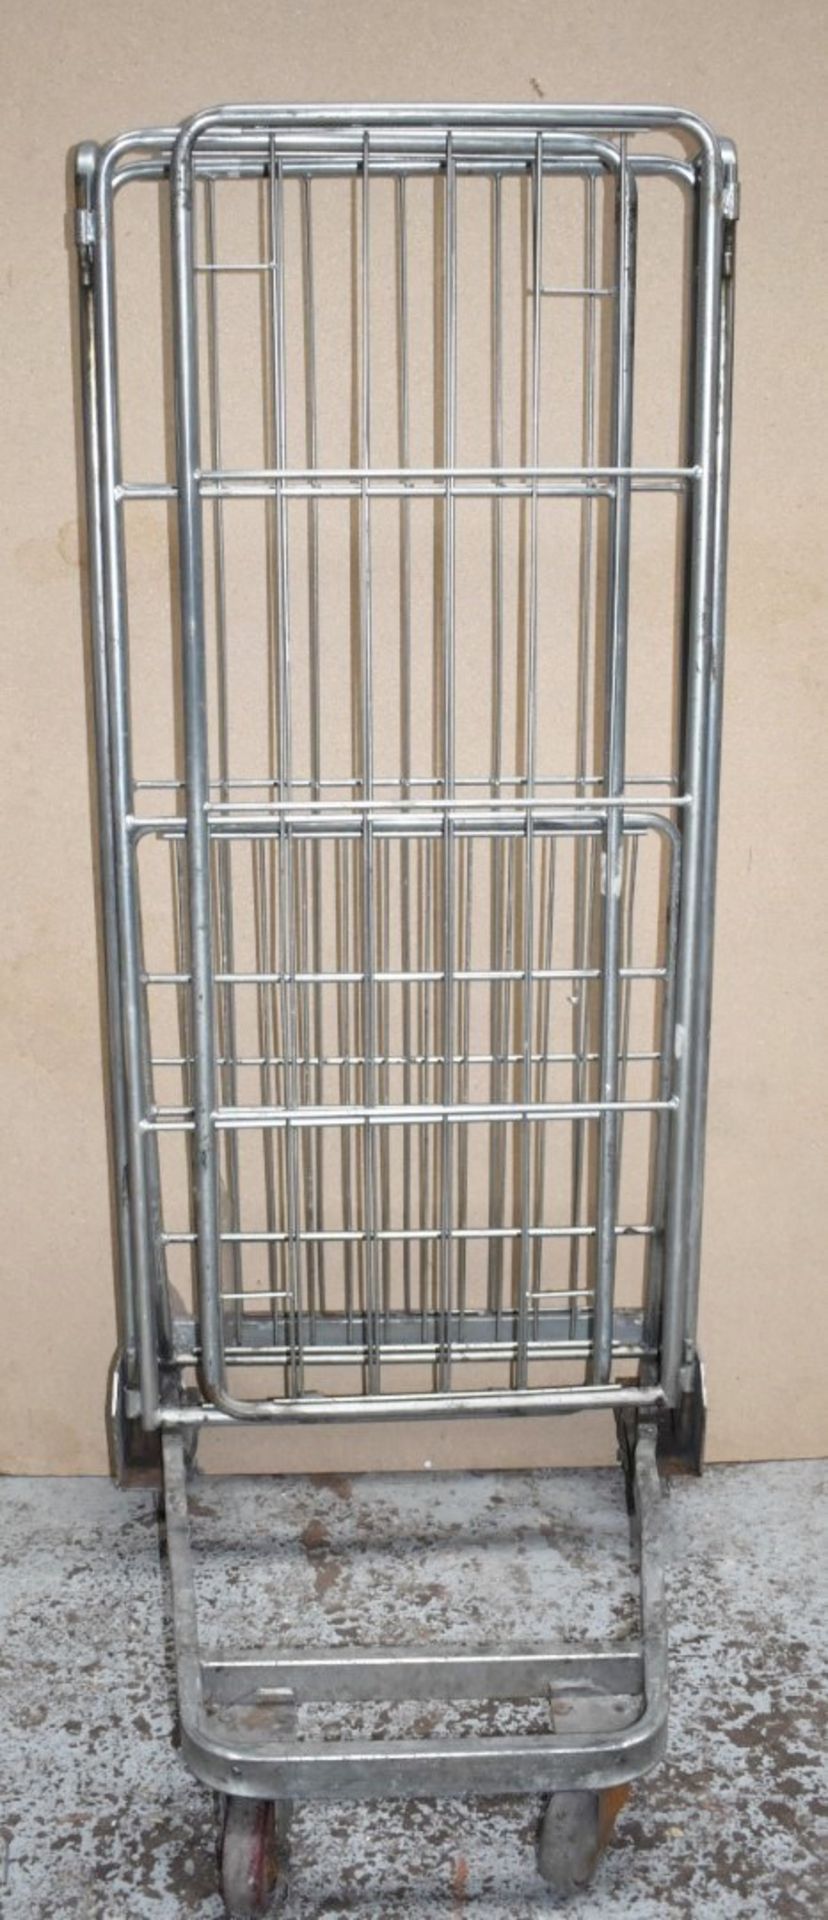 1 x Roller Cage With Heavy Duty Castors - Demountable With Three Sides - Ideal For Storing and - Image 2 of 9